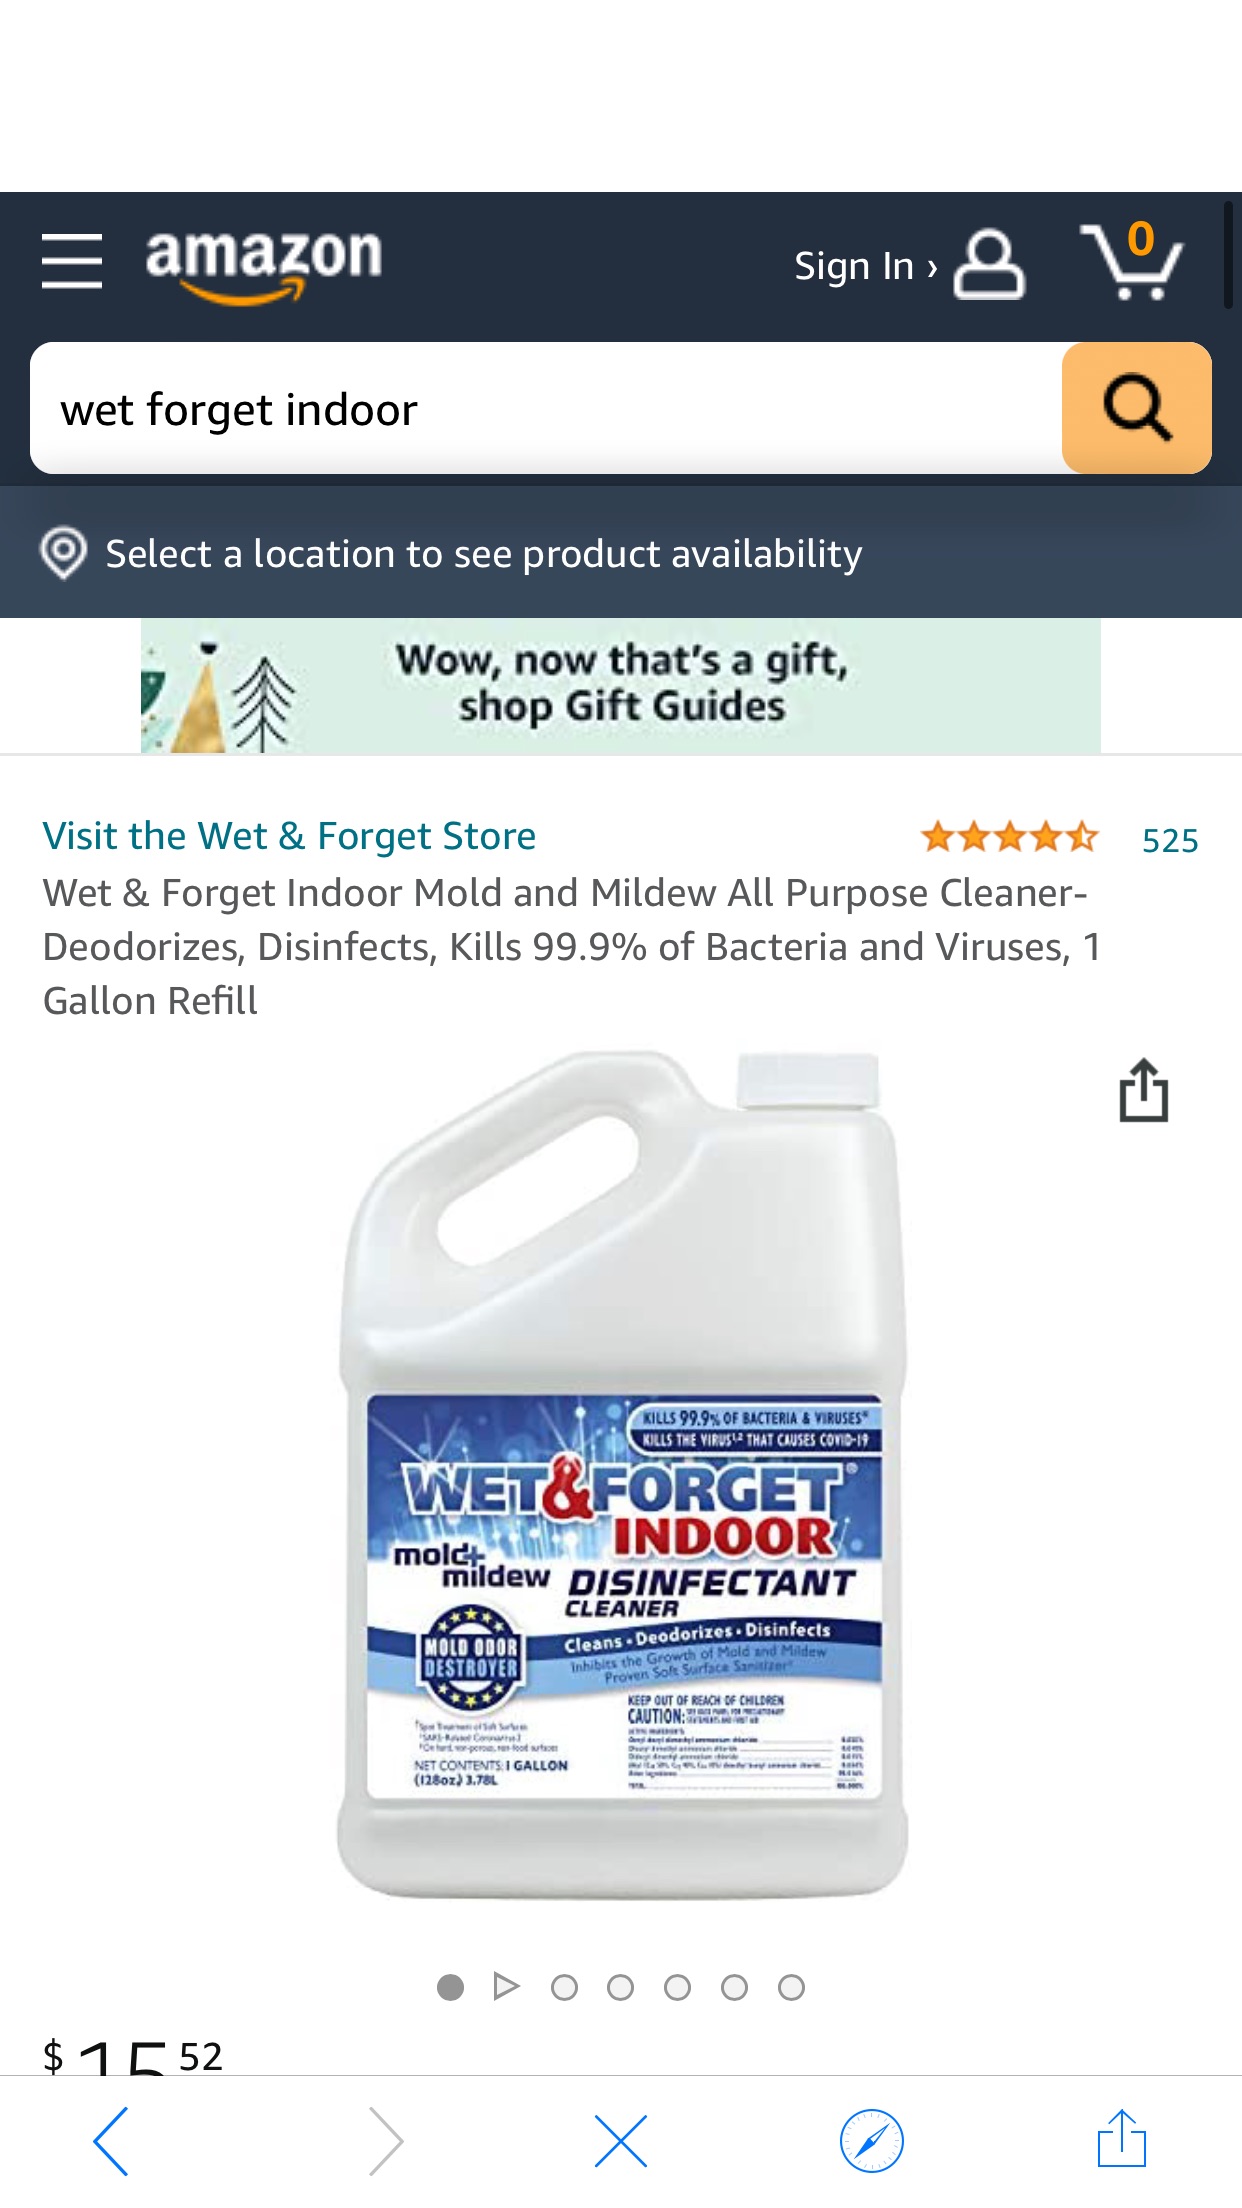 Amazon.com: Wet & Forget Indoor Mold and Mildew All Purpose Cleaner- Deodorizes, Disinfects, Kills 99.9% of Bacteria and Viruses, 1 Gallon 消毒液